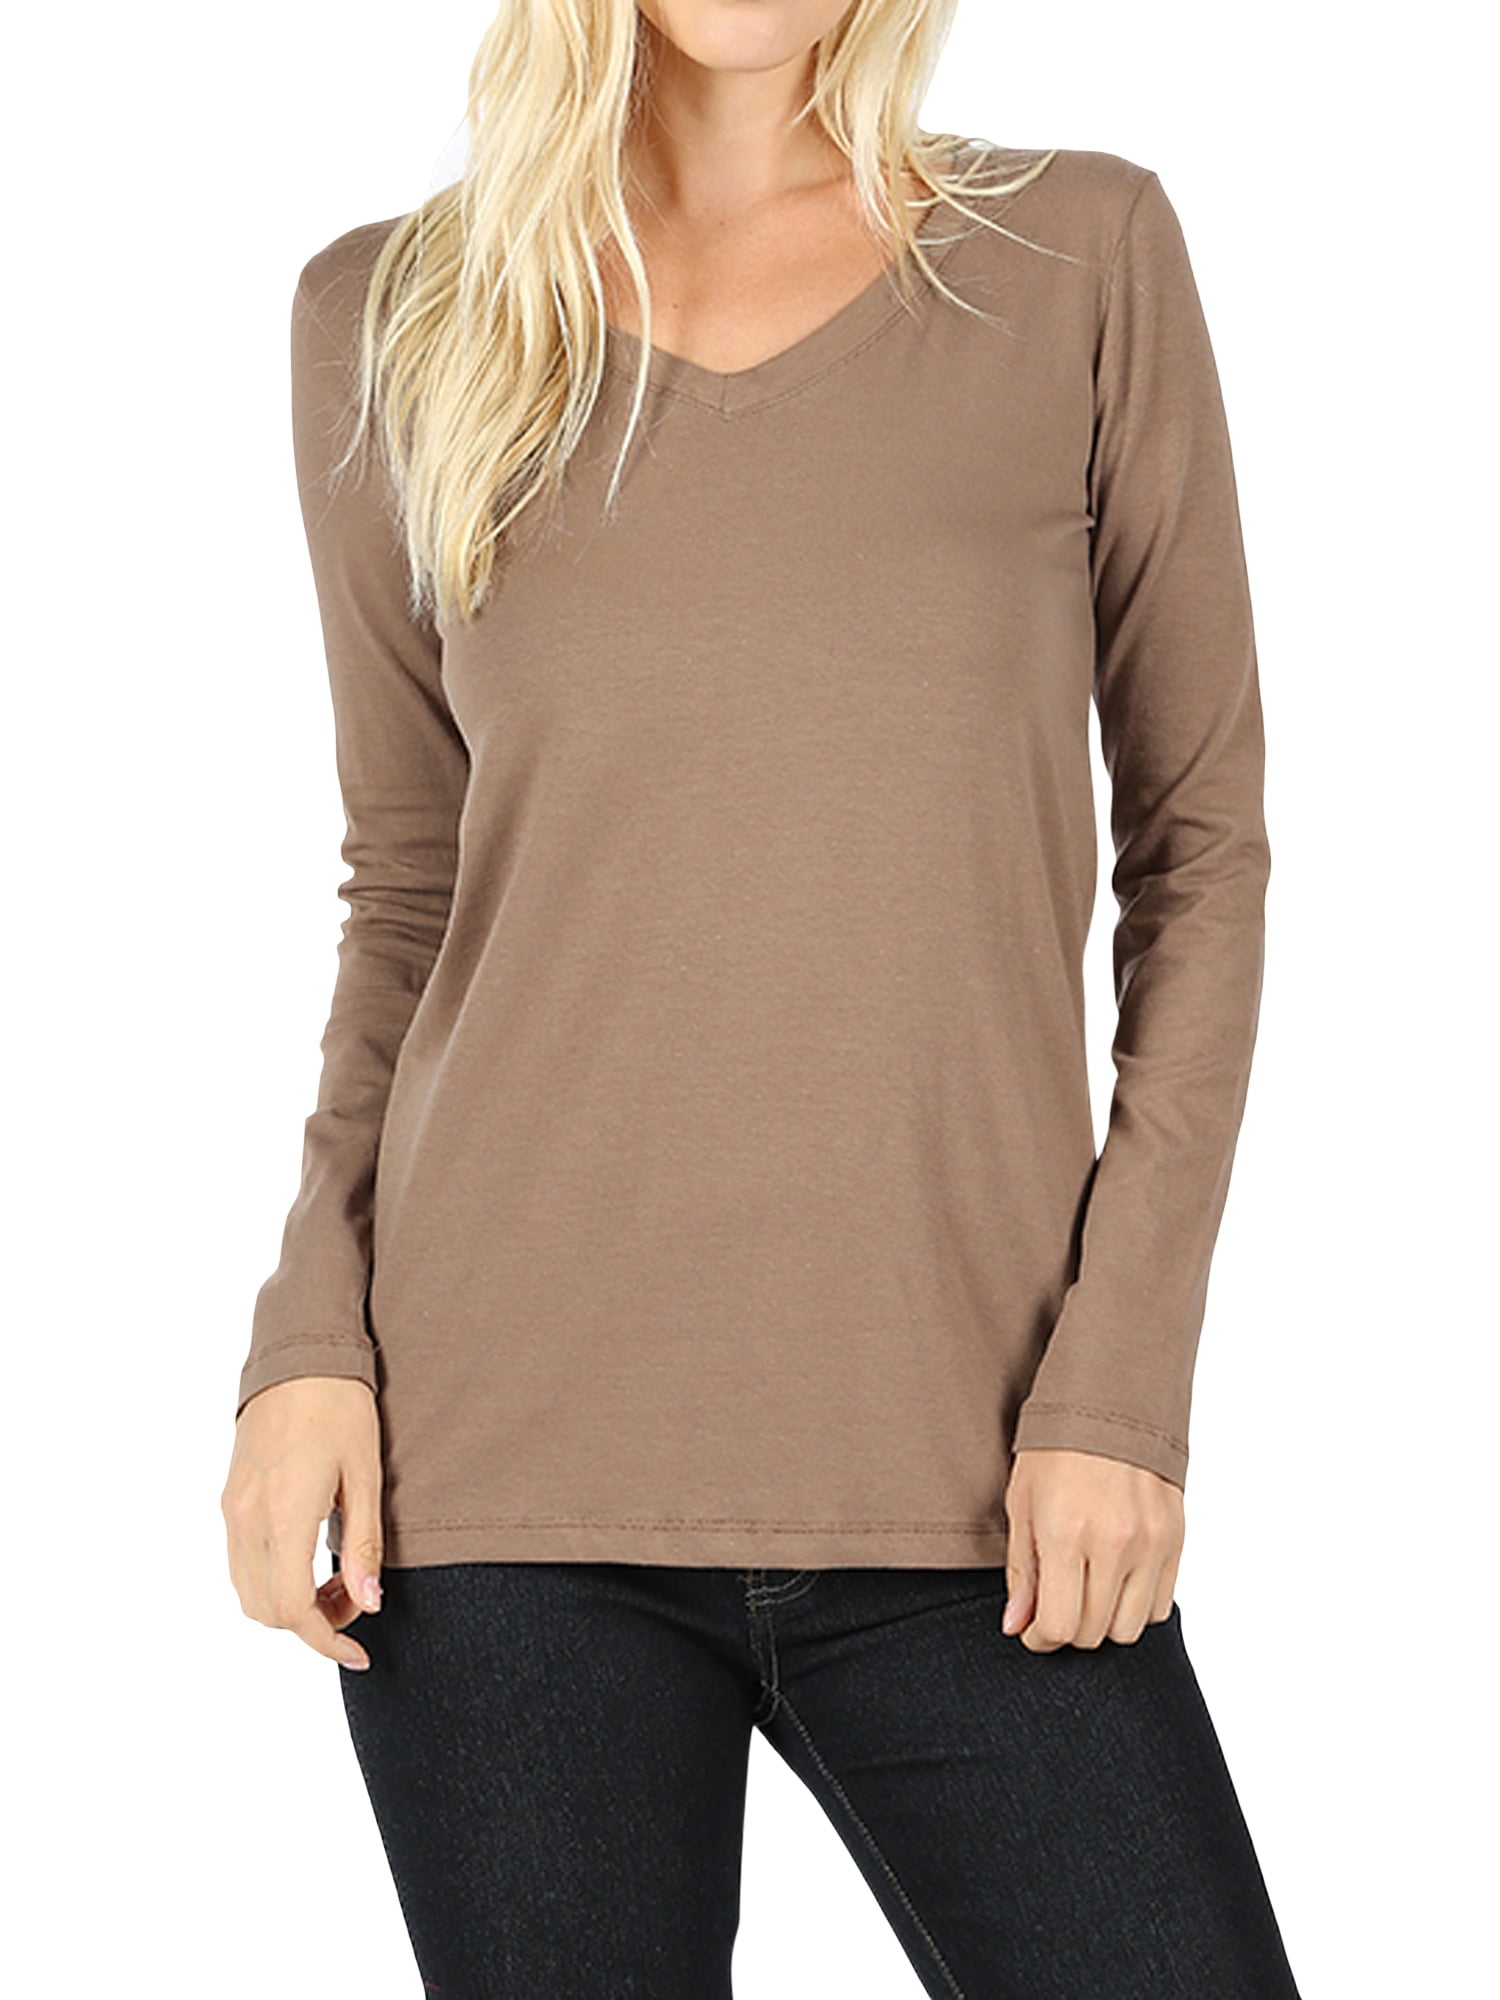 Women Casual Basic Cotton Loose Fit V-Neck Long Sleeve T-Shirt Top ...